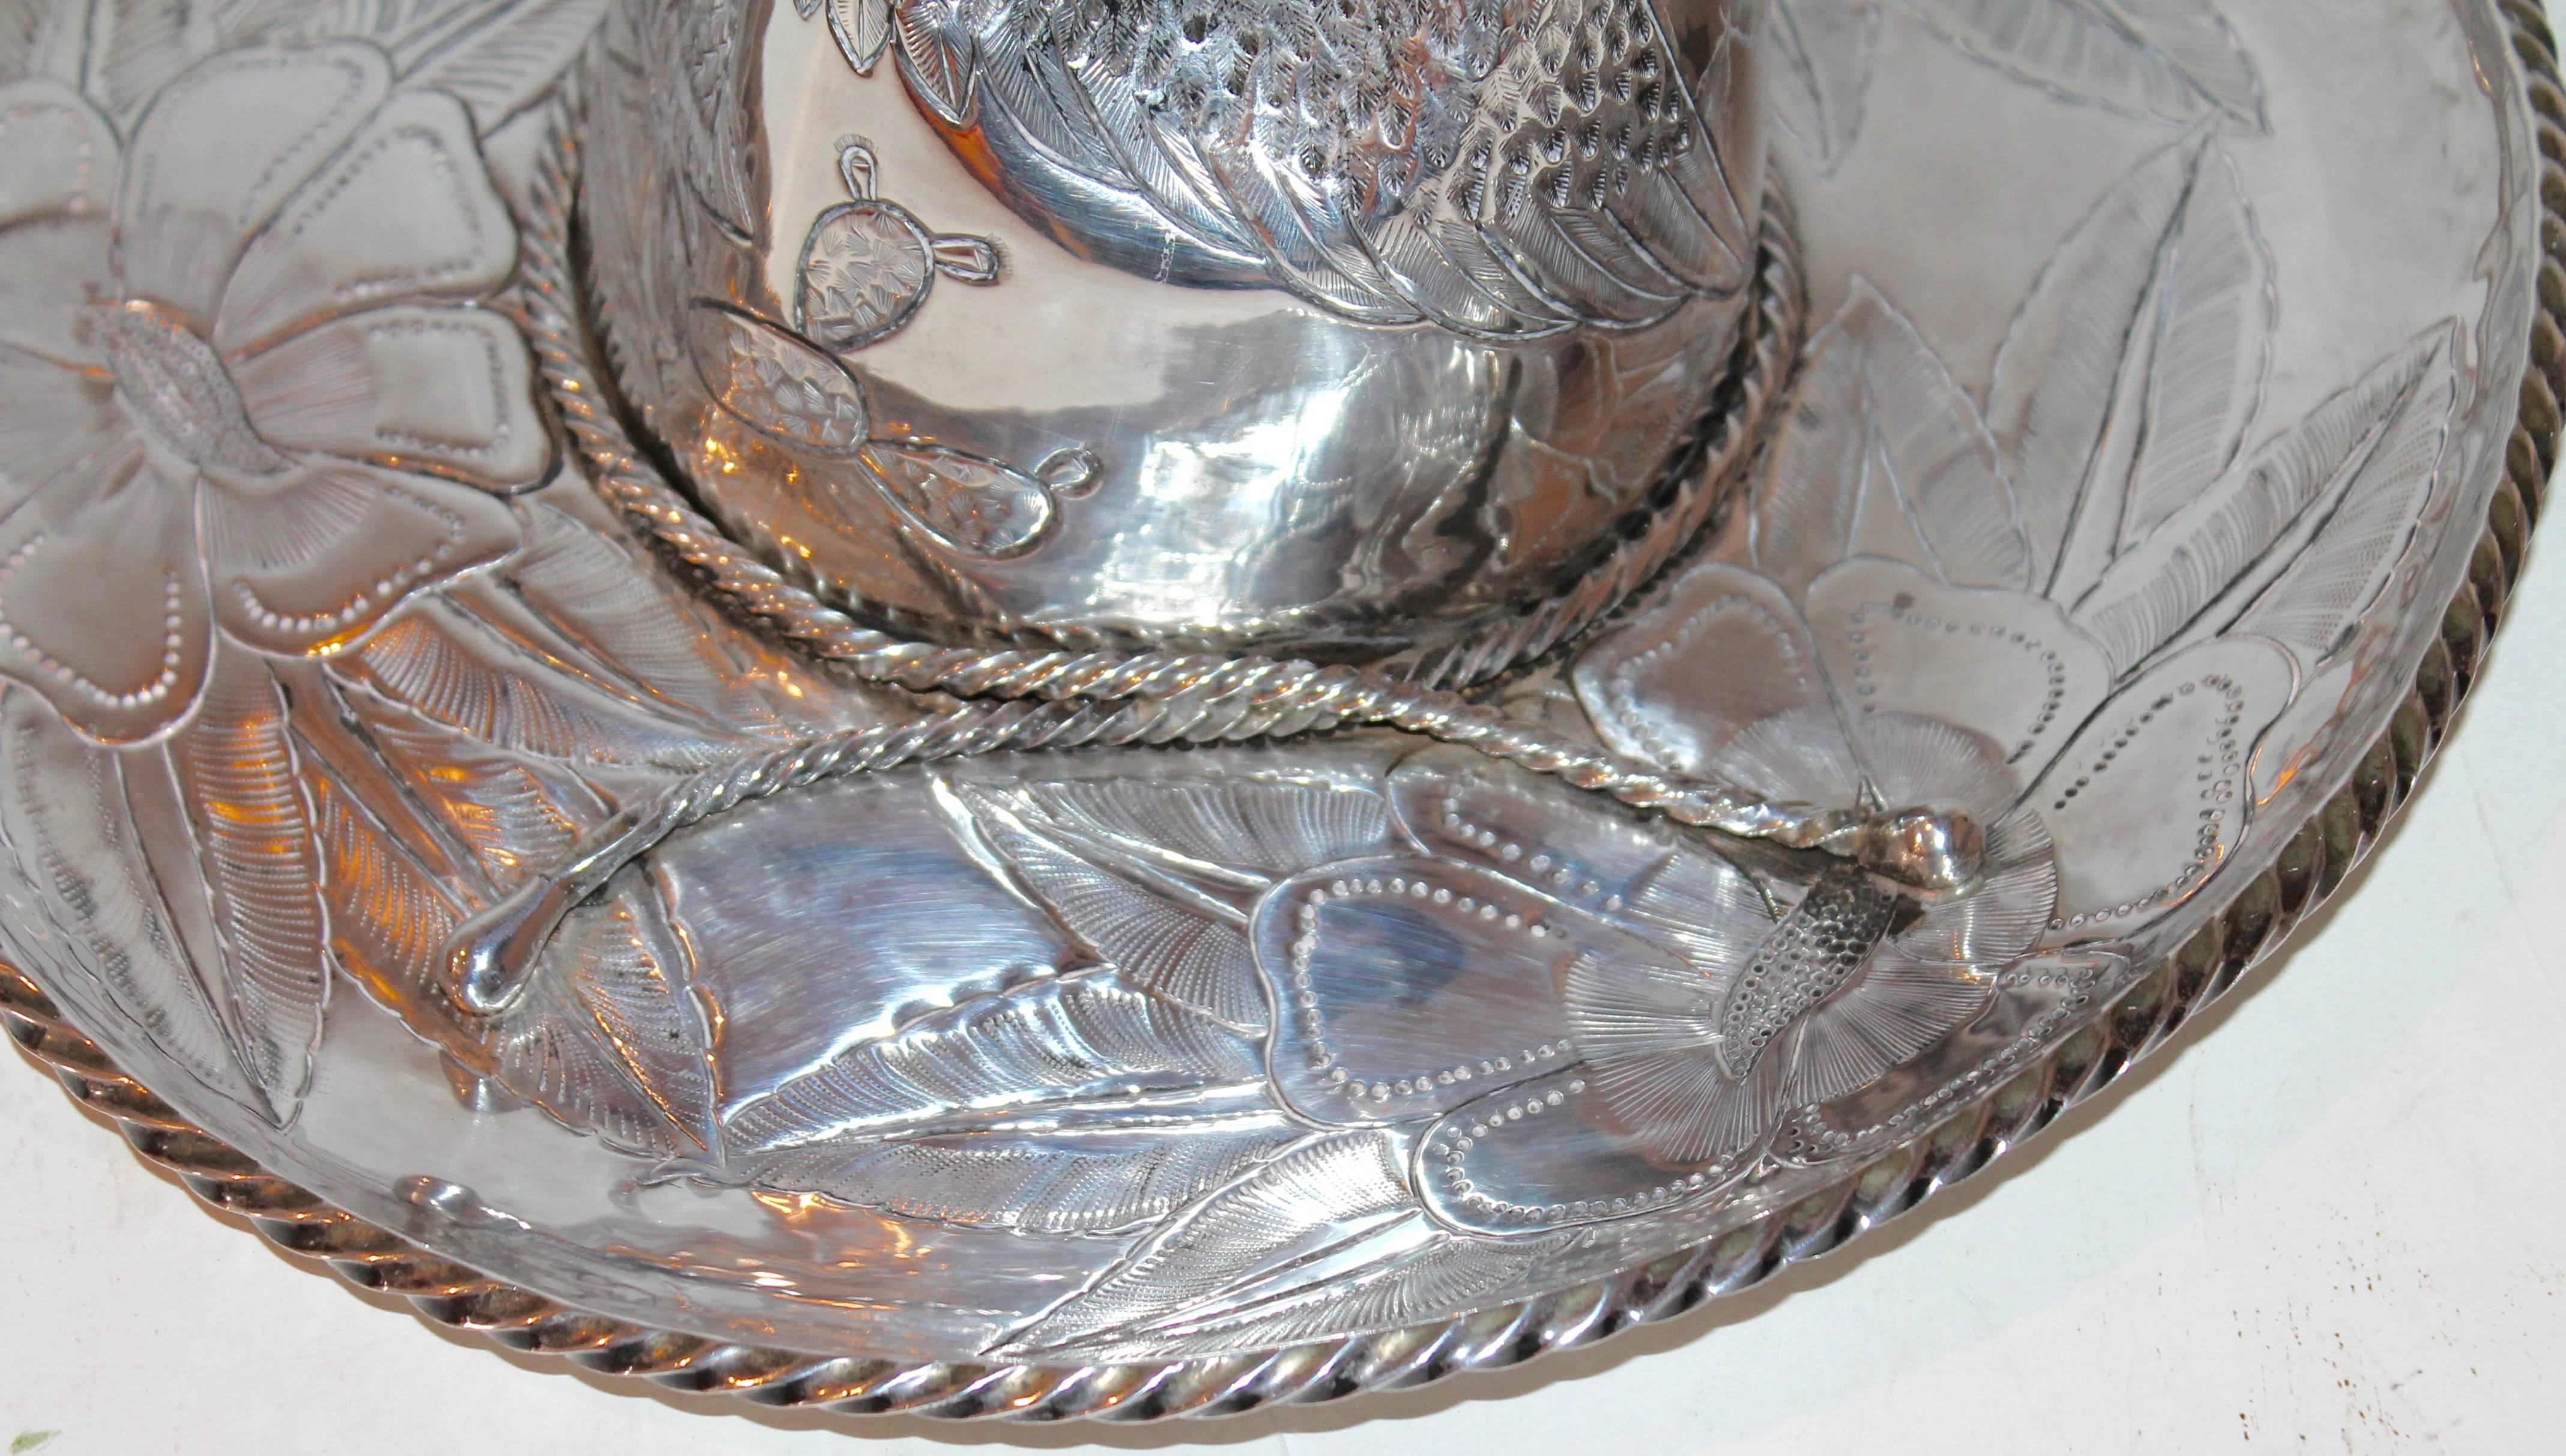 This extra large sterling silver sombrero is stamped Taxco Mexico and sterling 925. This very heavy sterling silver hat has a eagle engraved with a snake in its mouth and roped border. The floral engraved back round is typical of the Mexican motif.